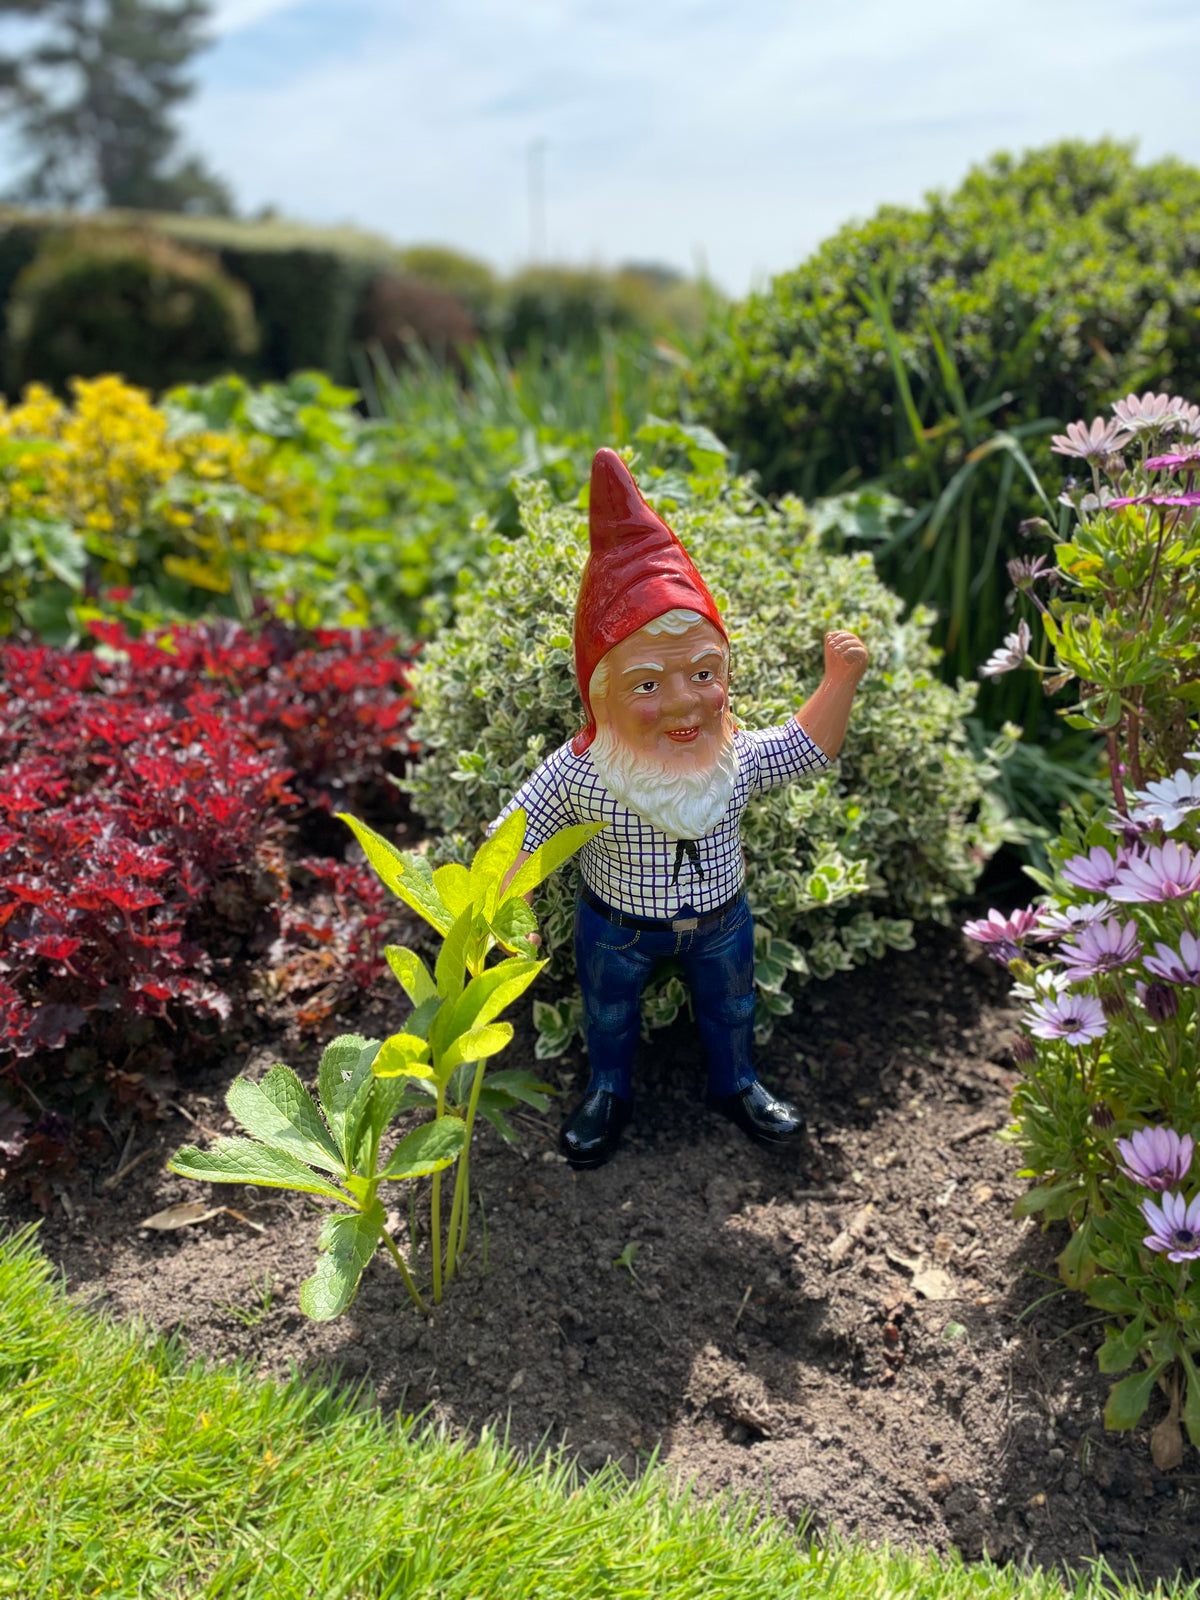 as Griebel garden gnome in a flower bed he is wearing a red hat. Gnomeshomes